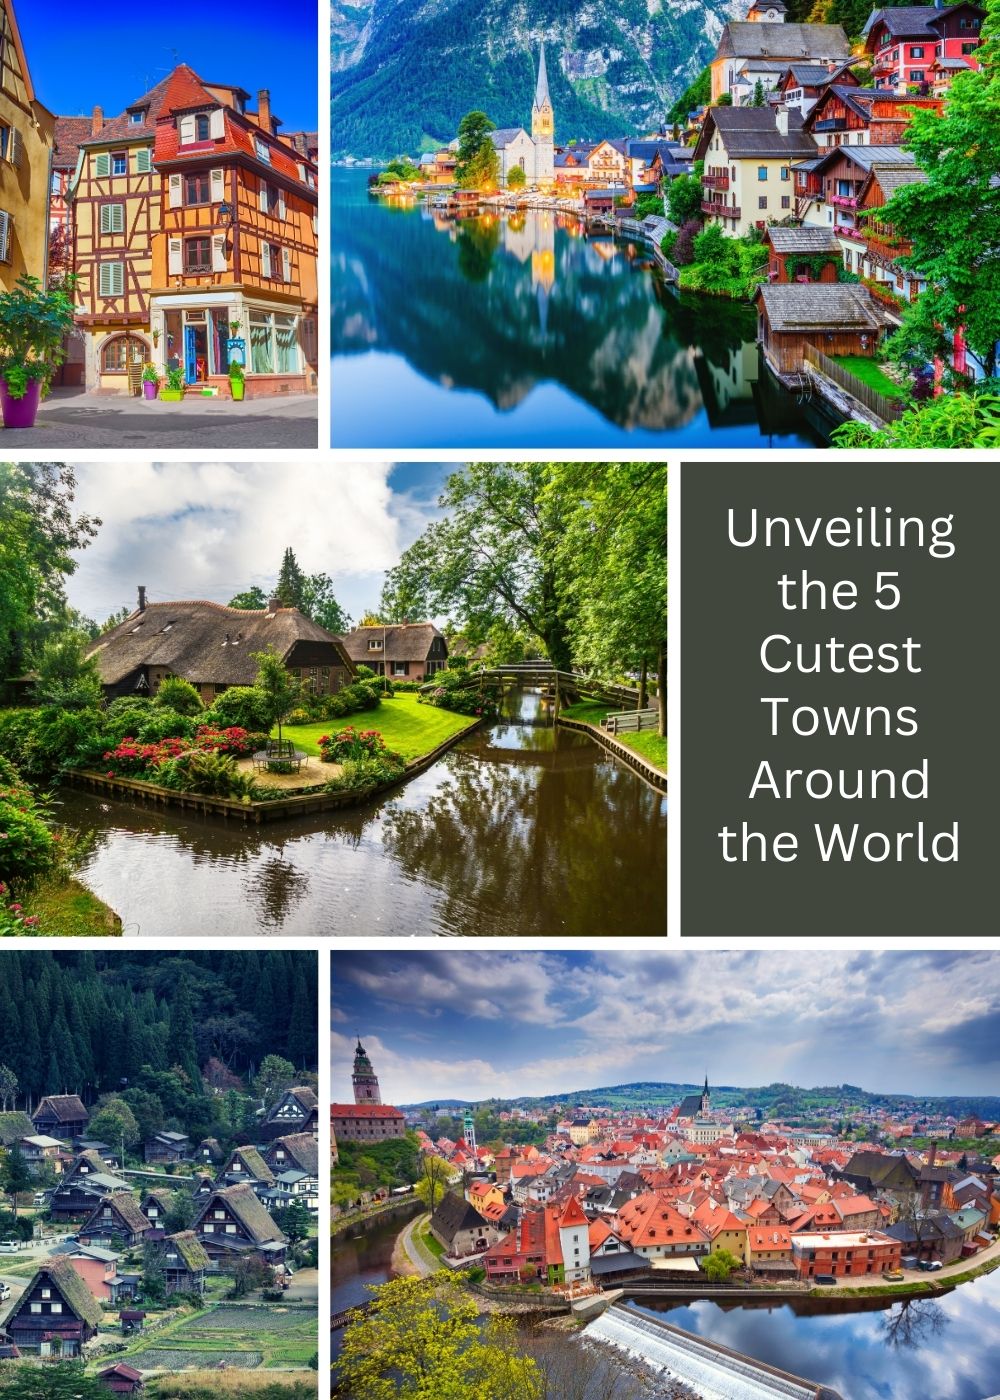 cutest towns villages in the world cute towns cute villages to visit